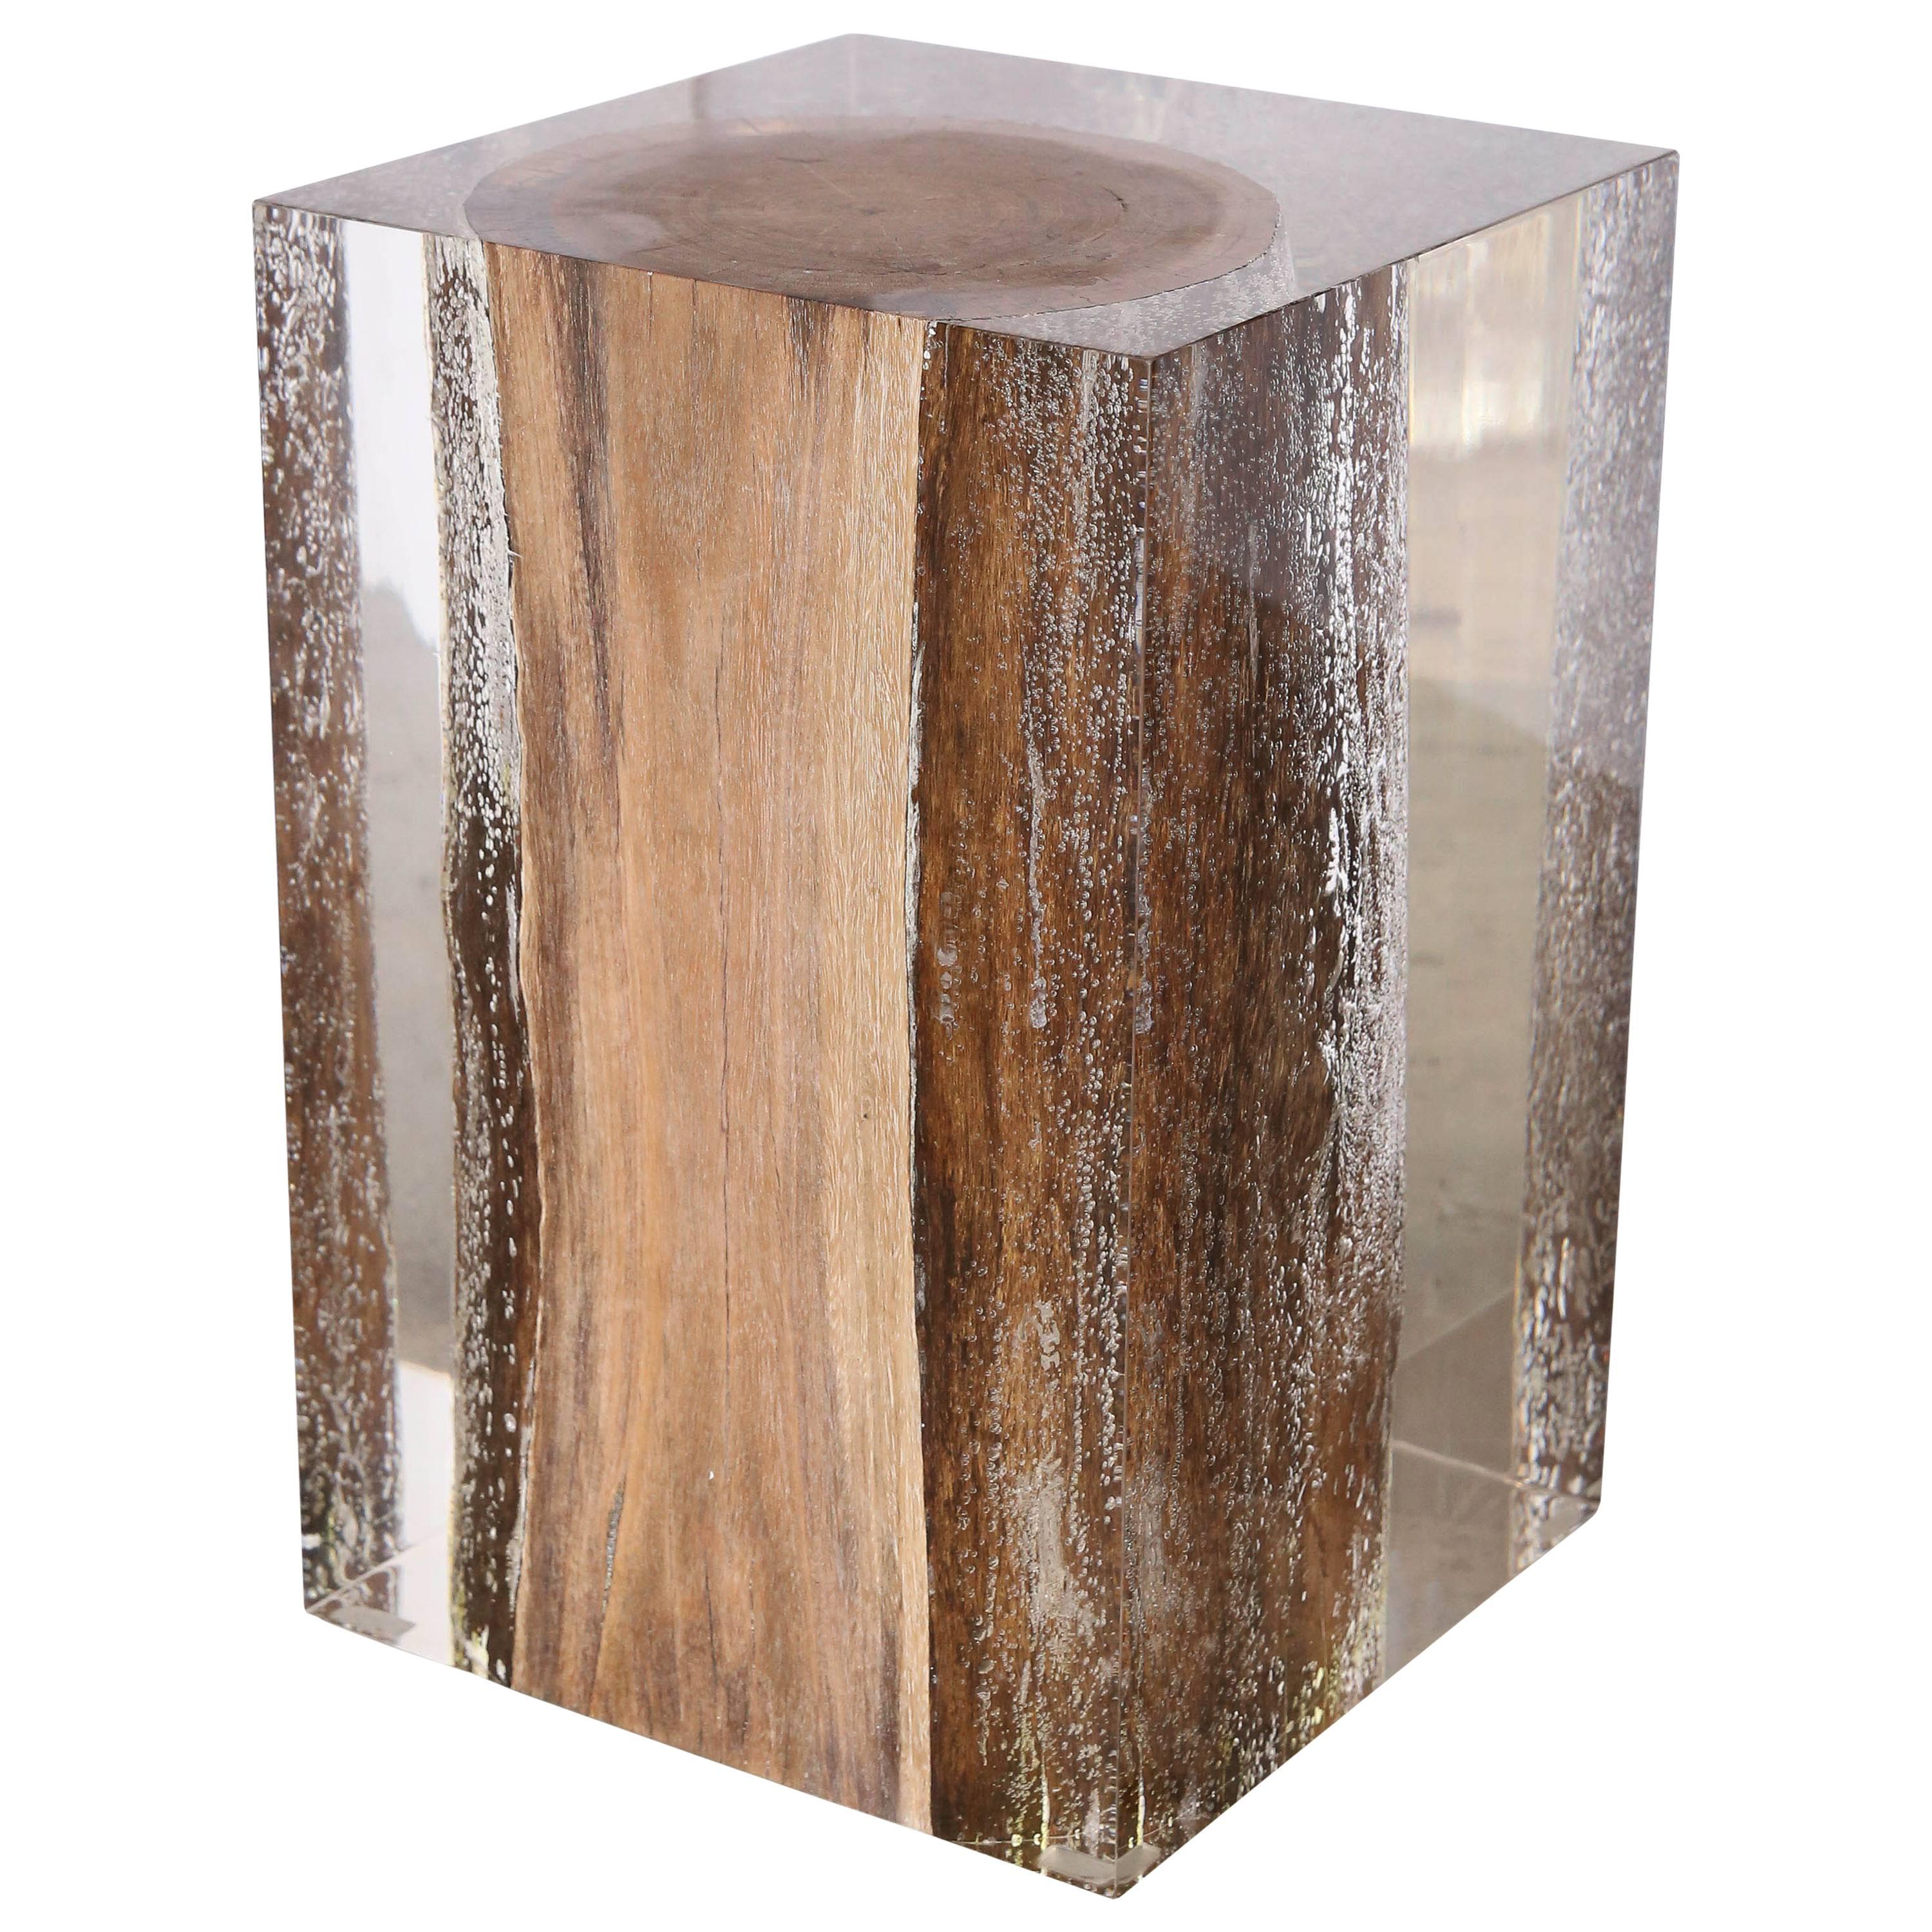 Acrylic Glass Nilleq Side Table and Stool